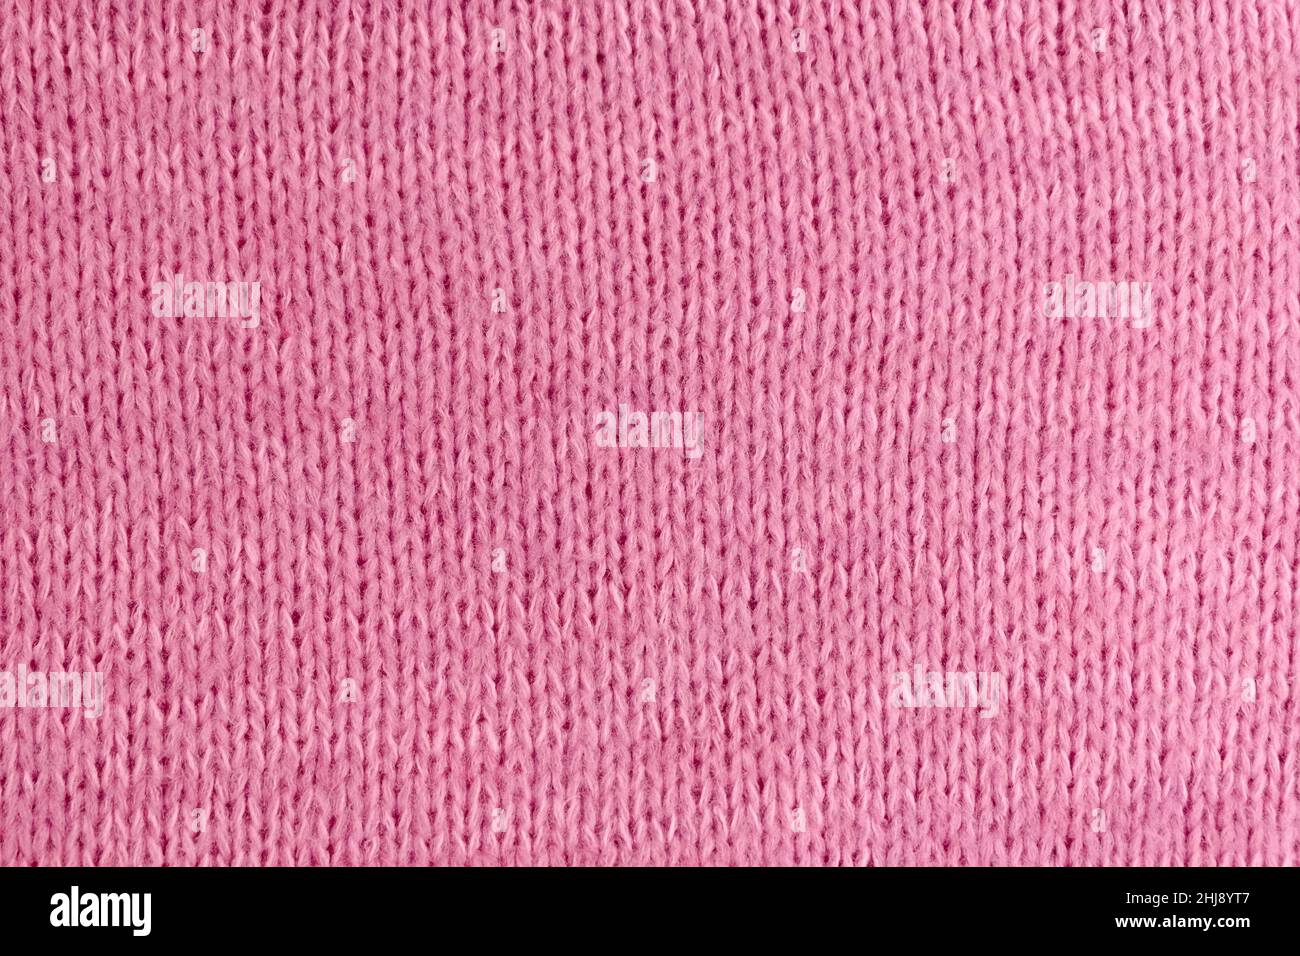 Soft pink woolen knitted textured cloth background mockup, copy space Stock Photo